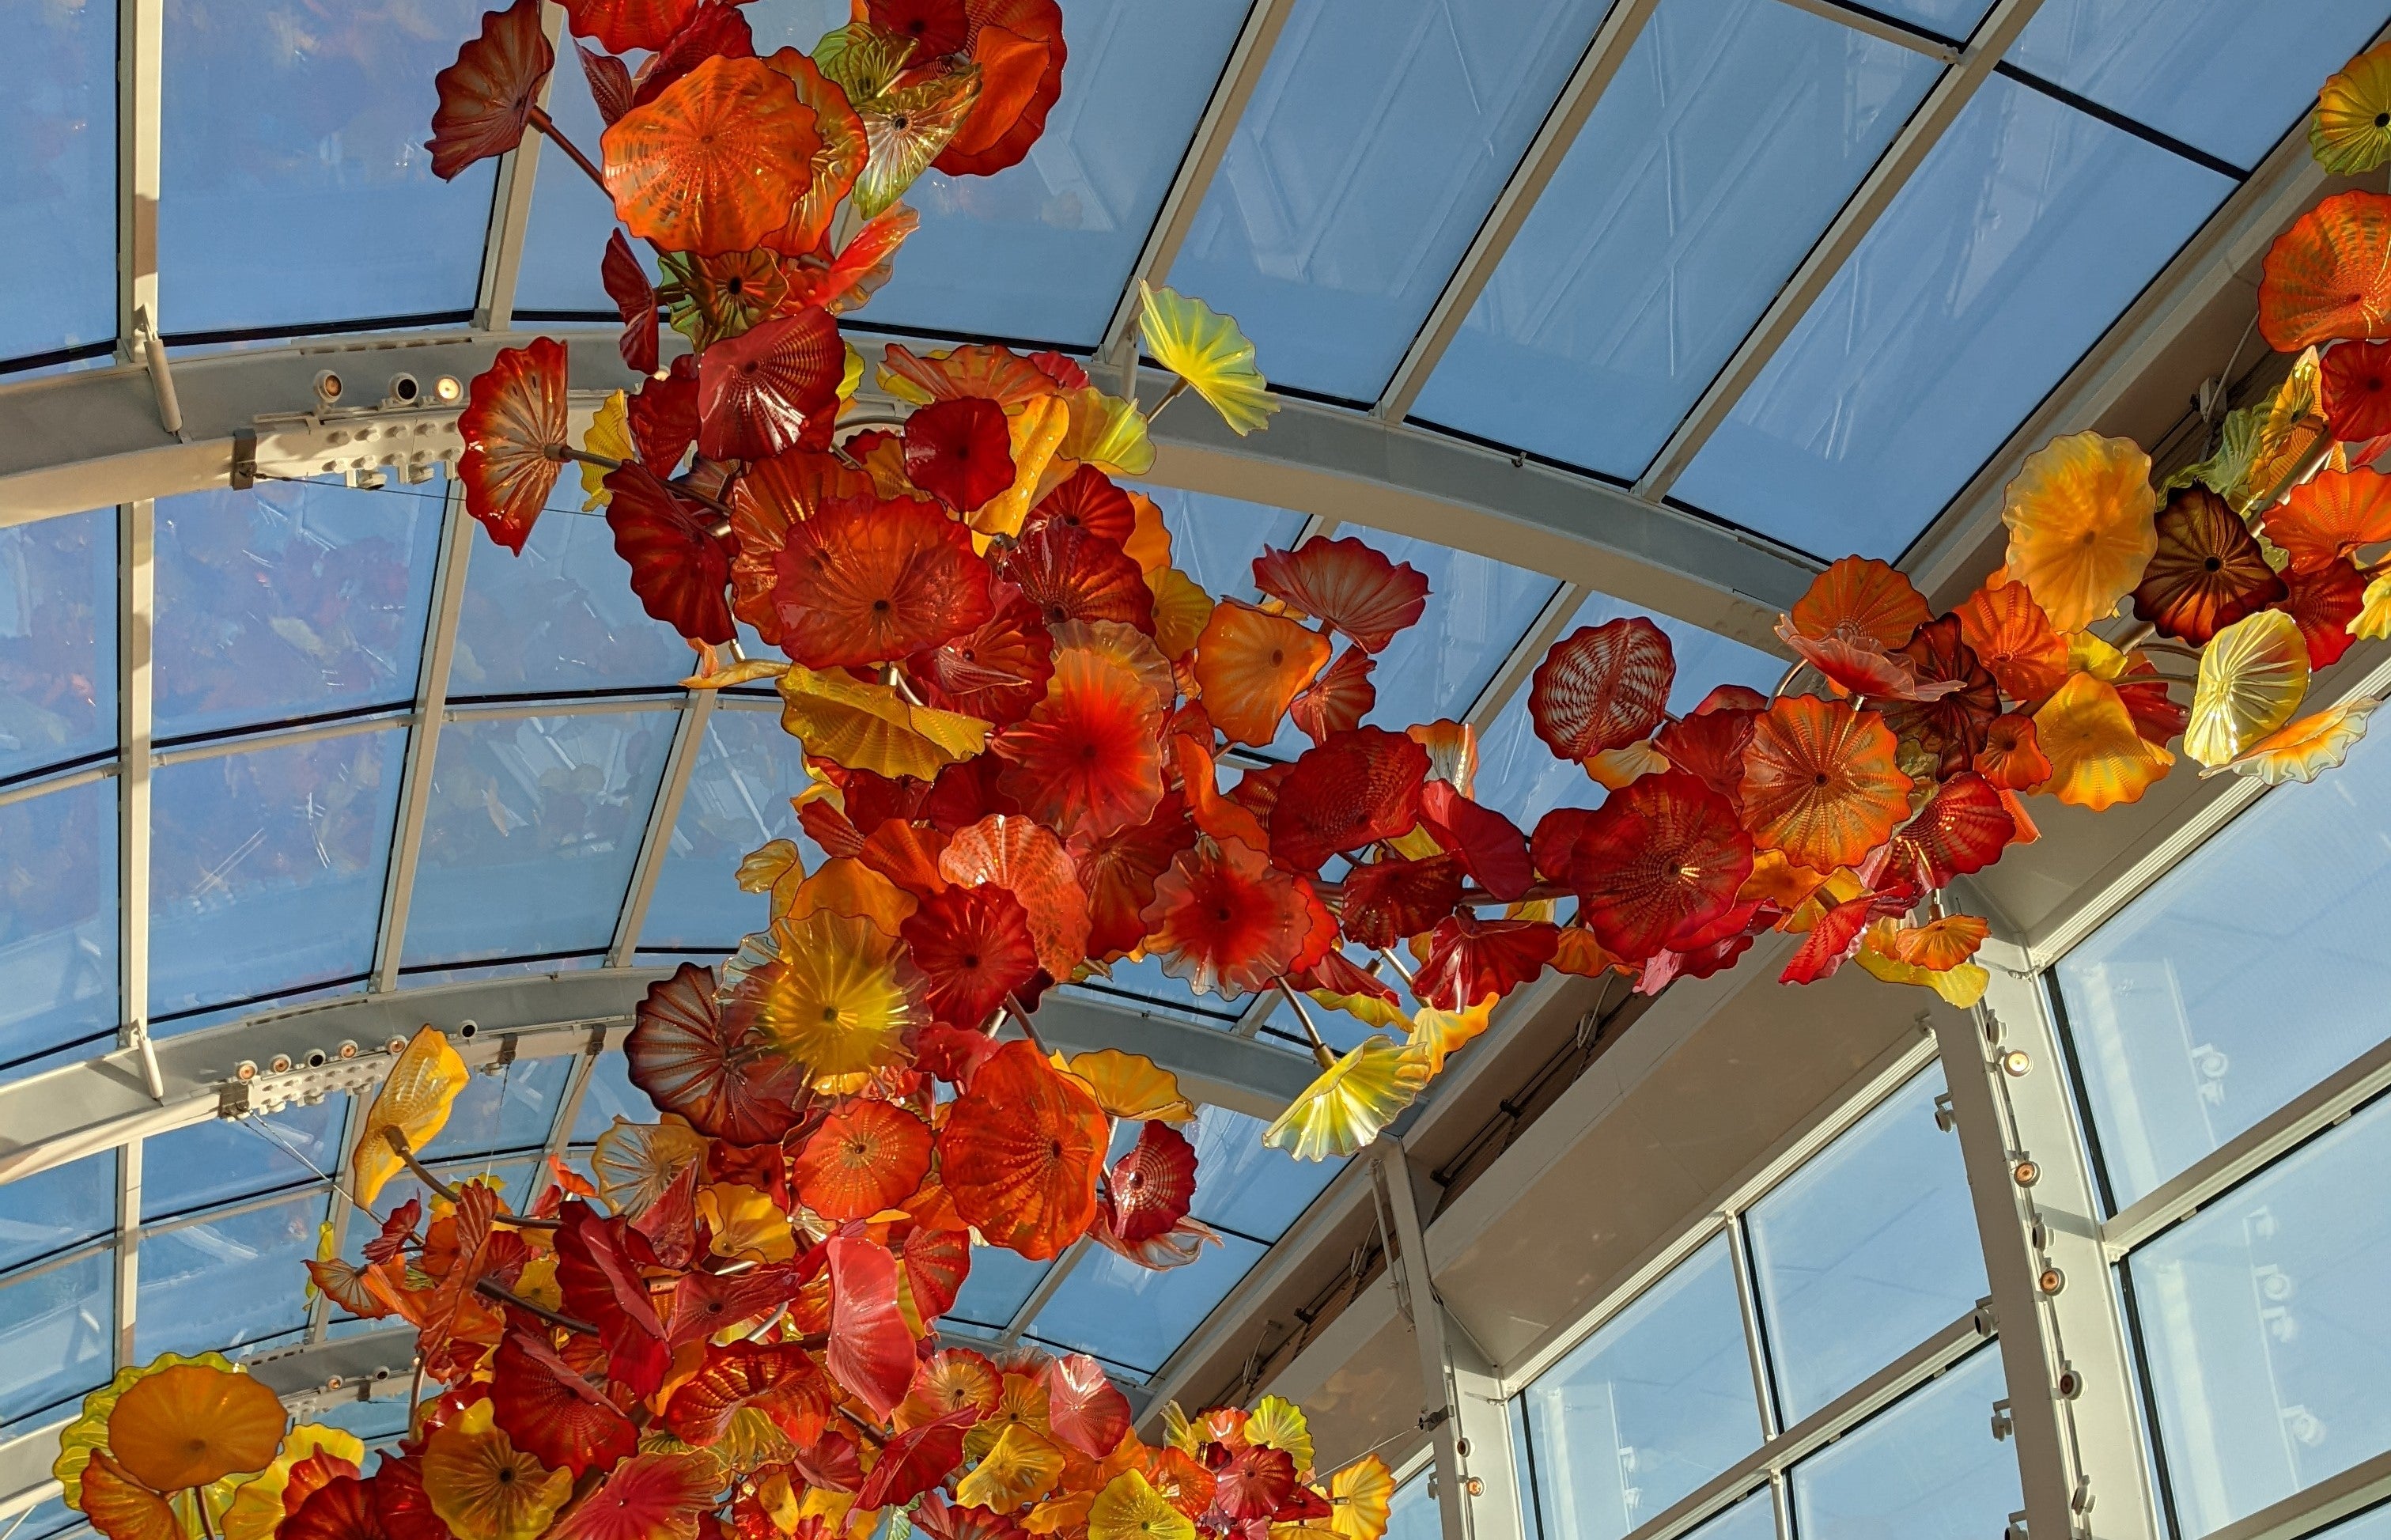 Photograph of a glass sculpture in a glass building, red, yellow, orange disks connected